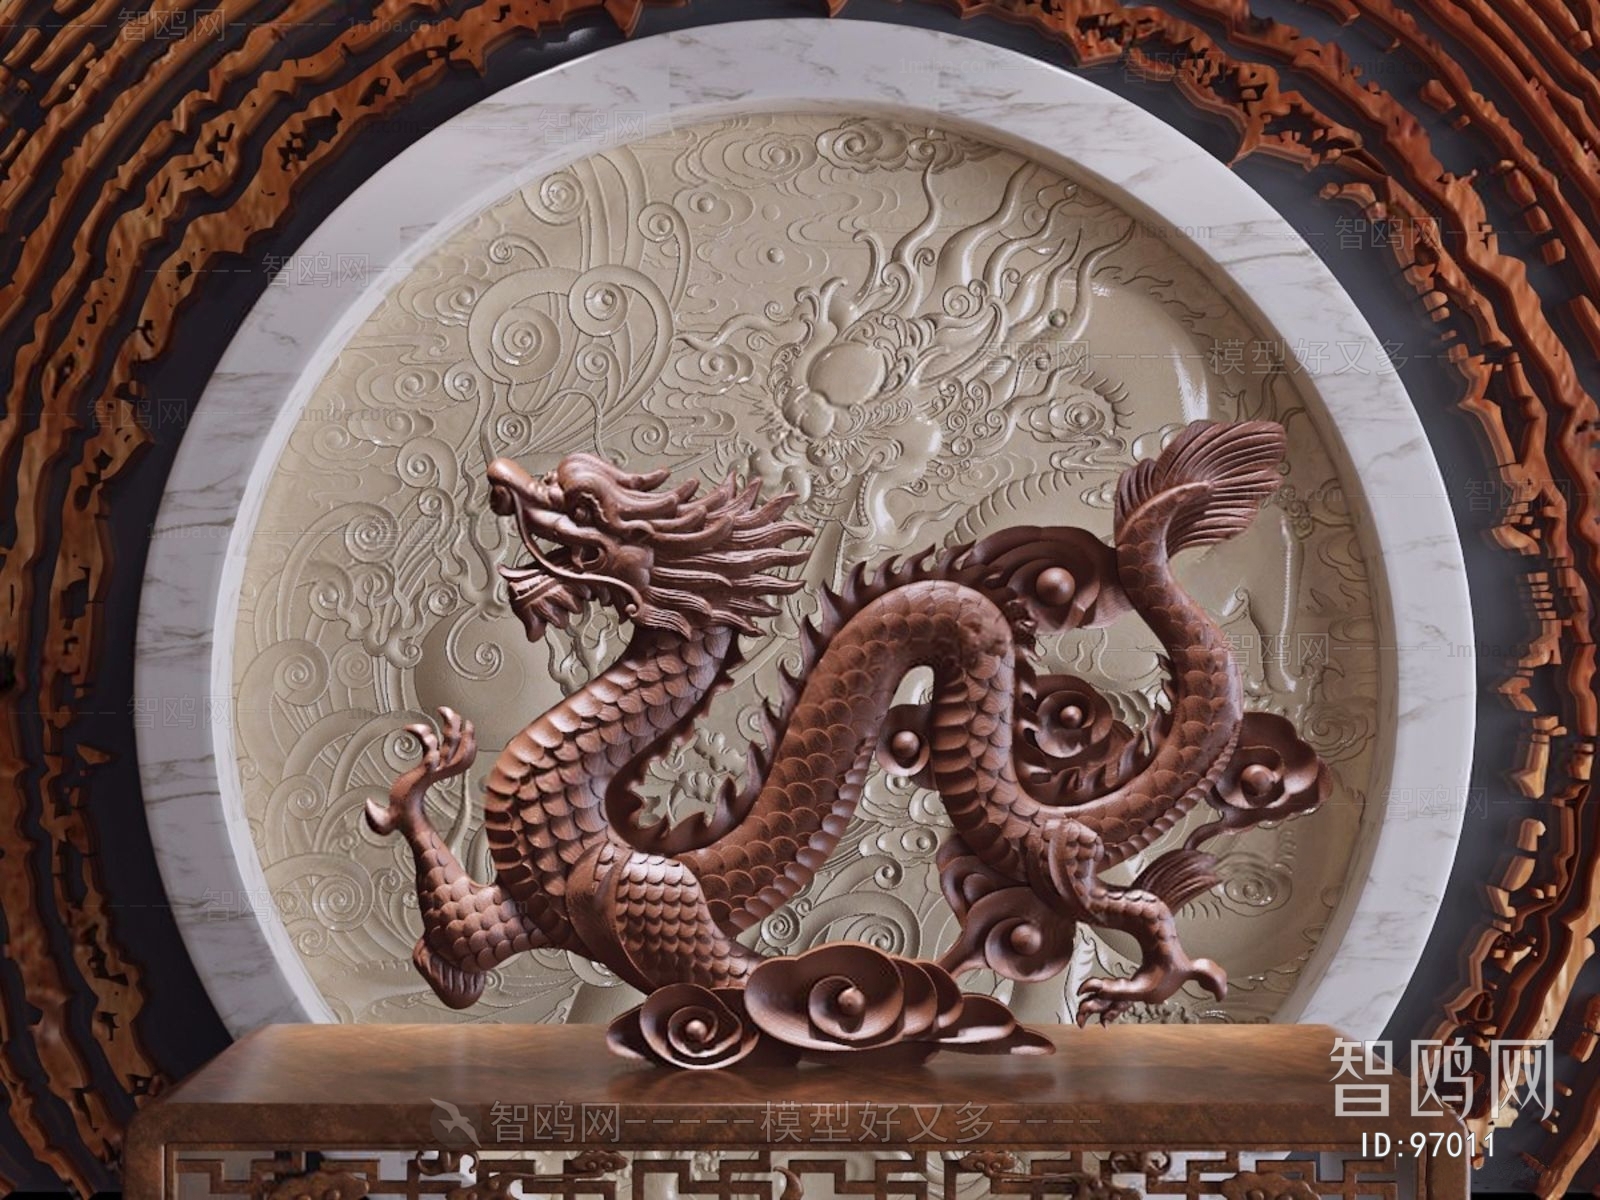 Chinese Style Sculpture